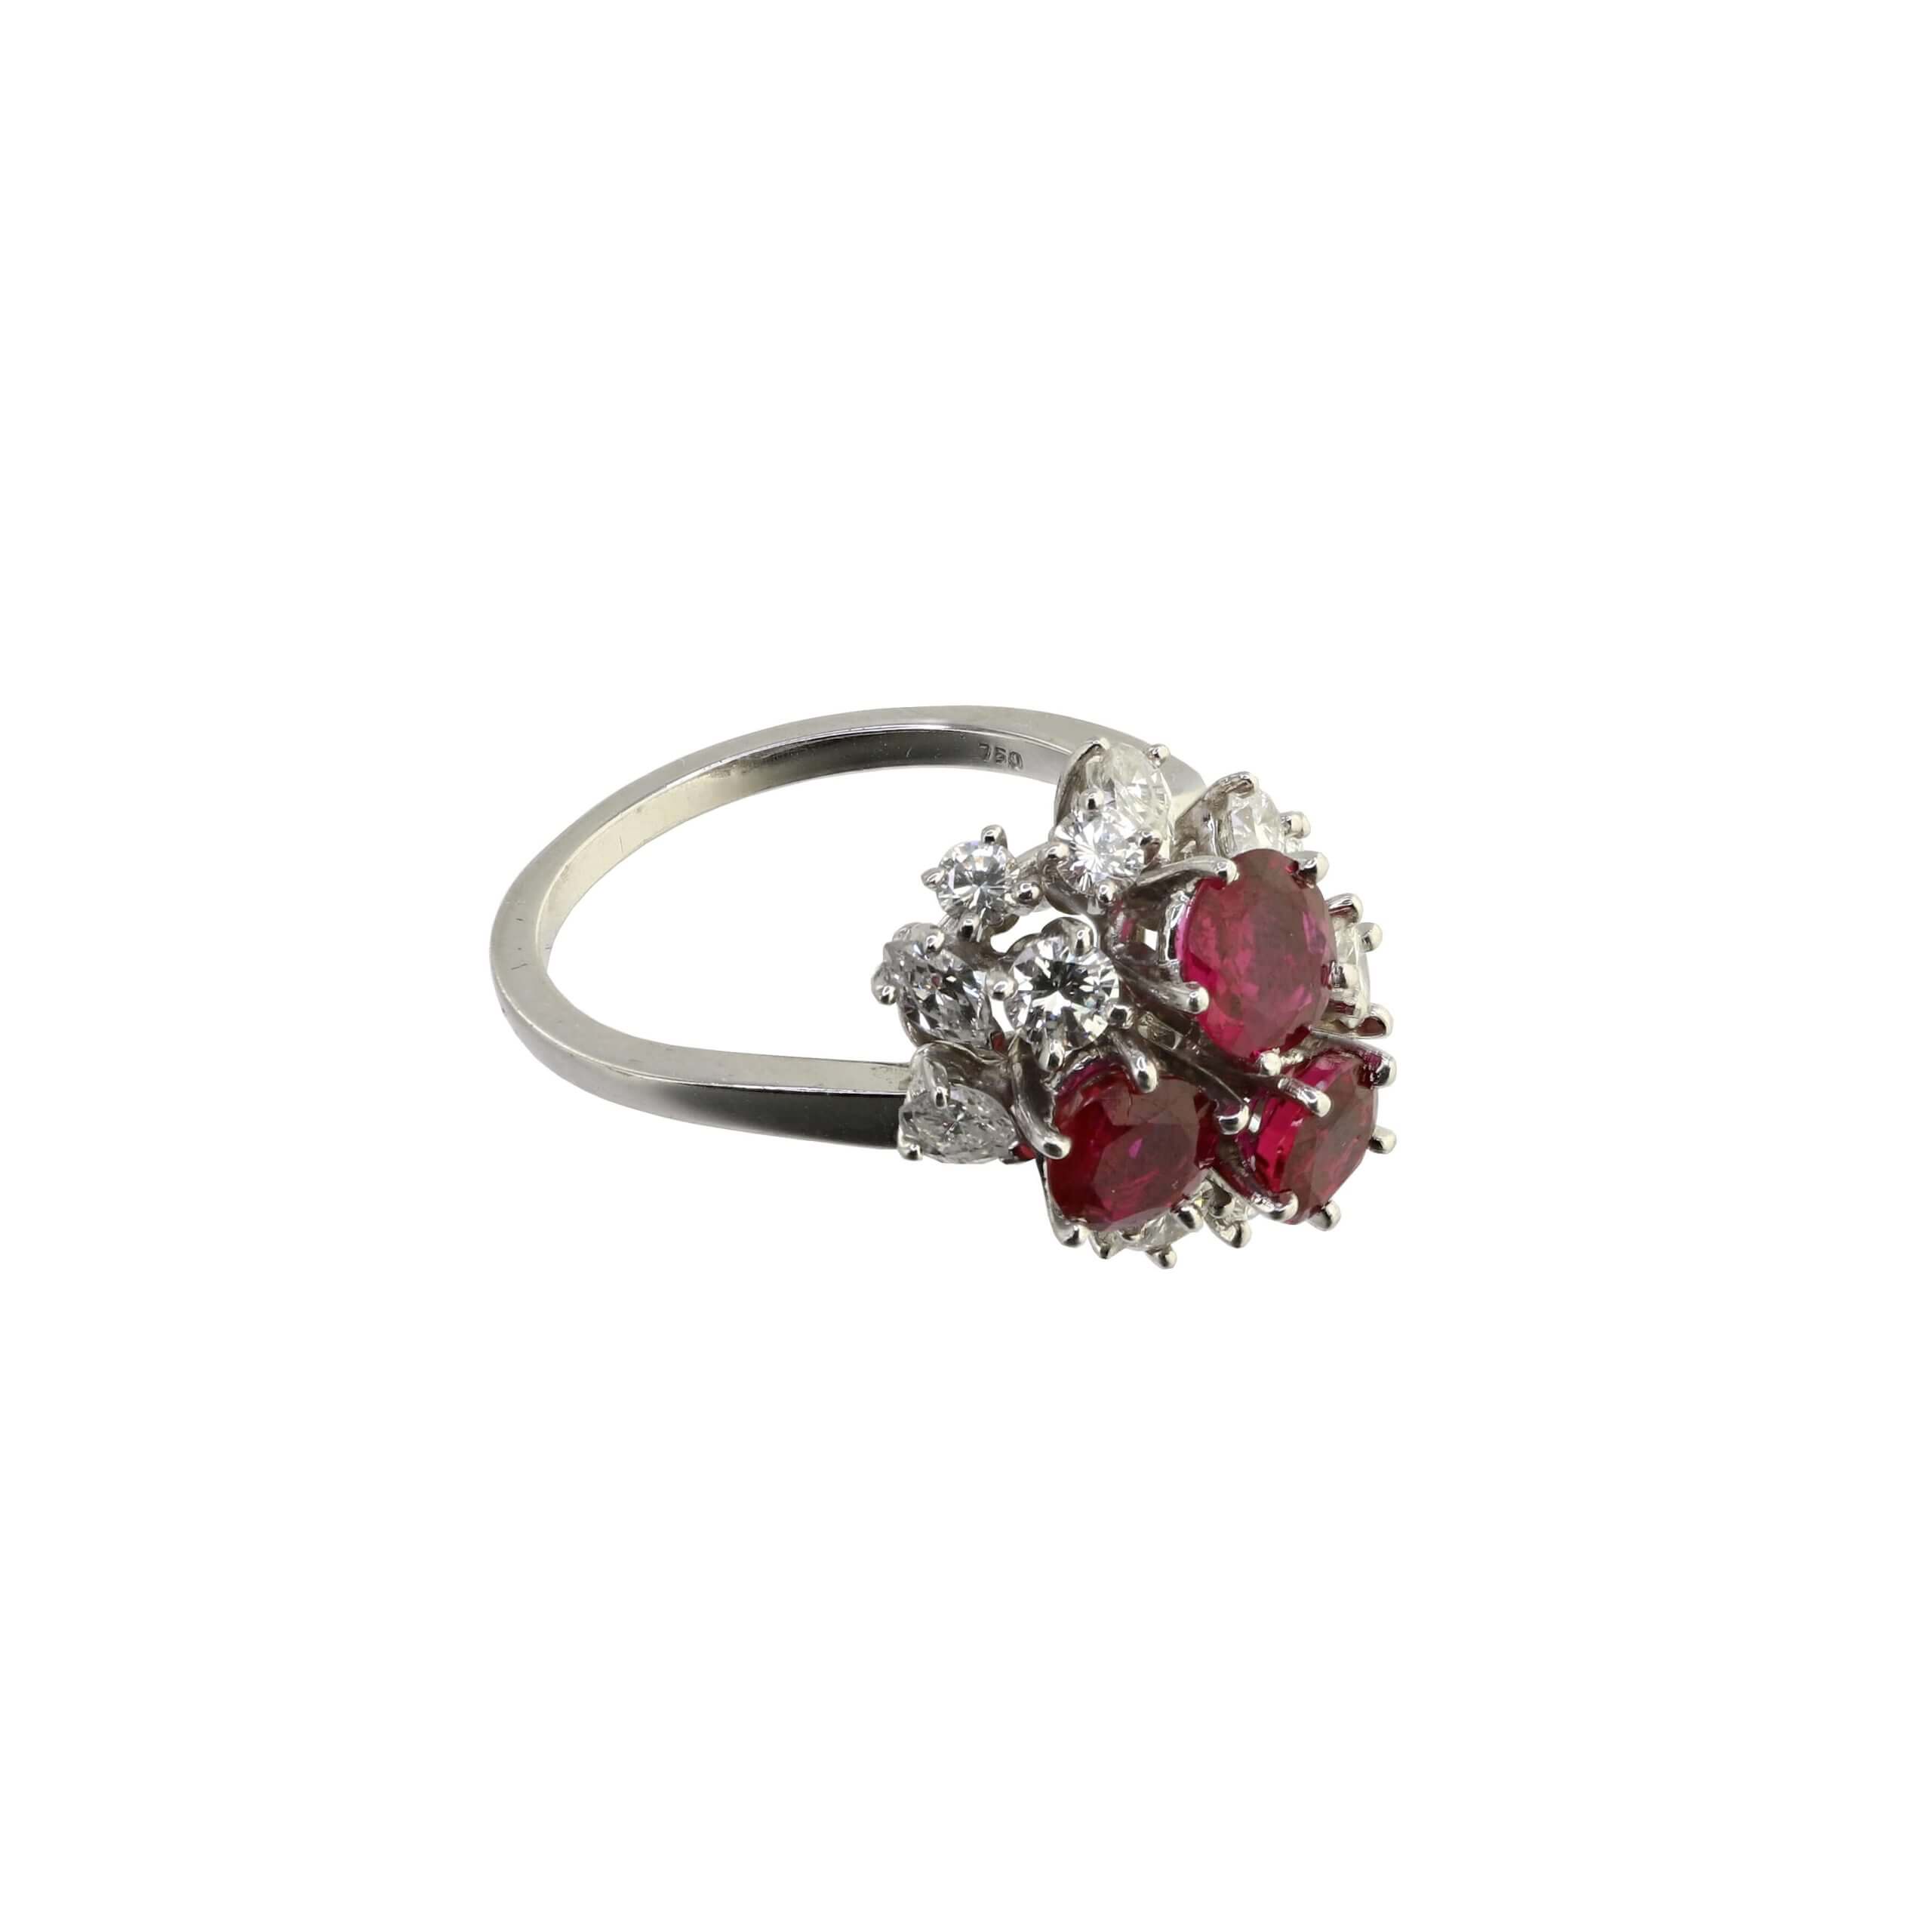 Ruby Diamond Ring, signed by Meister Jeweller